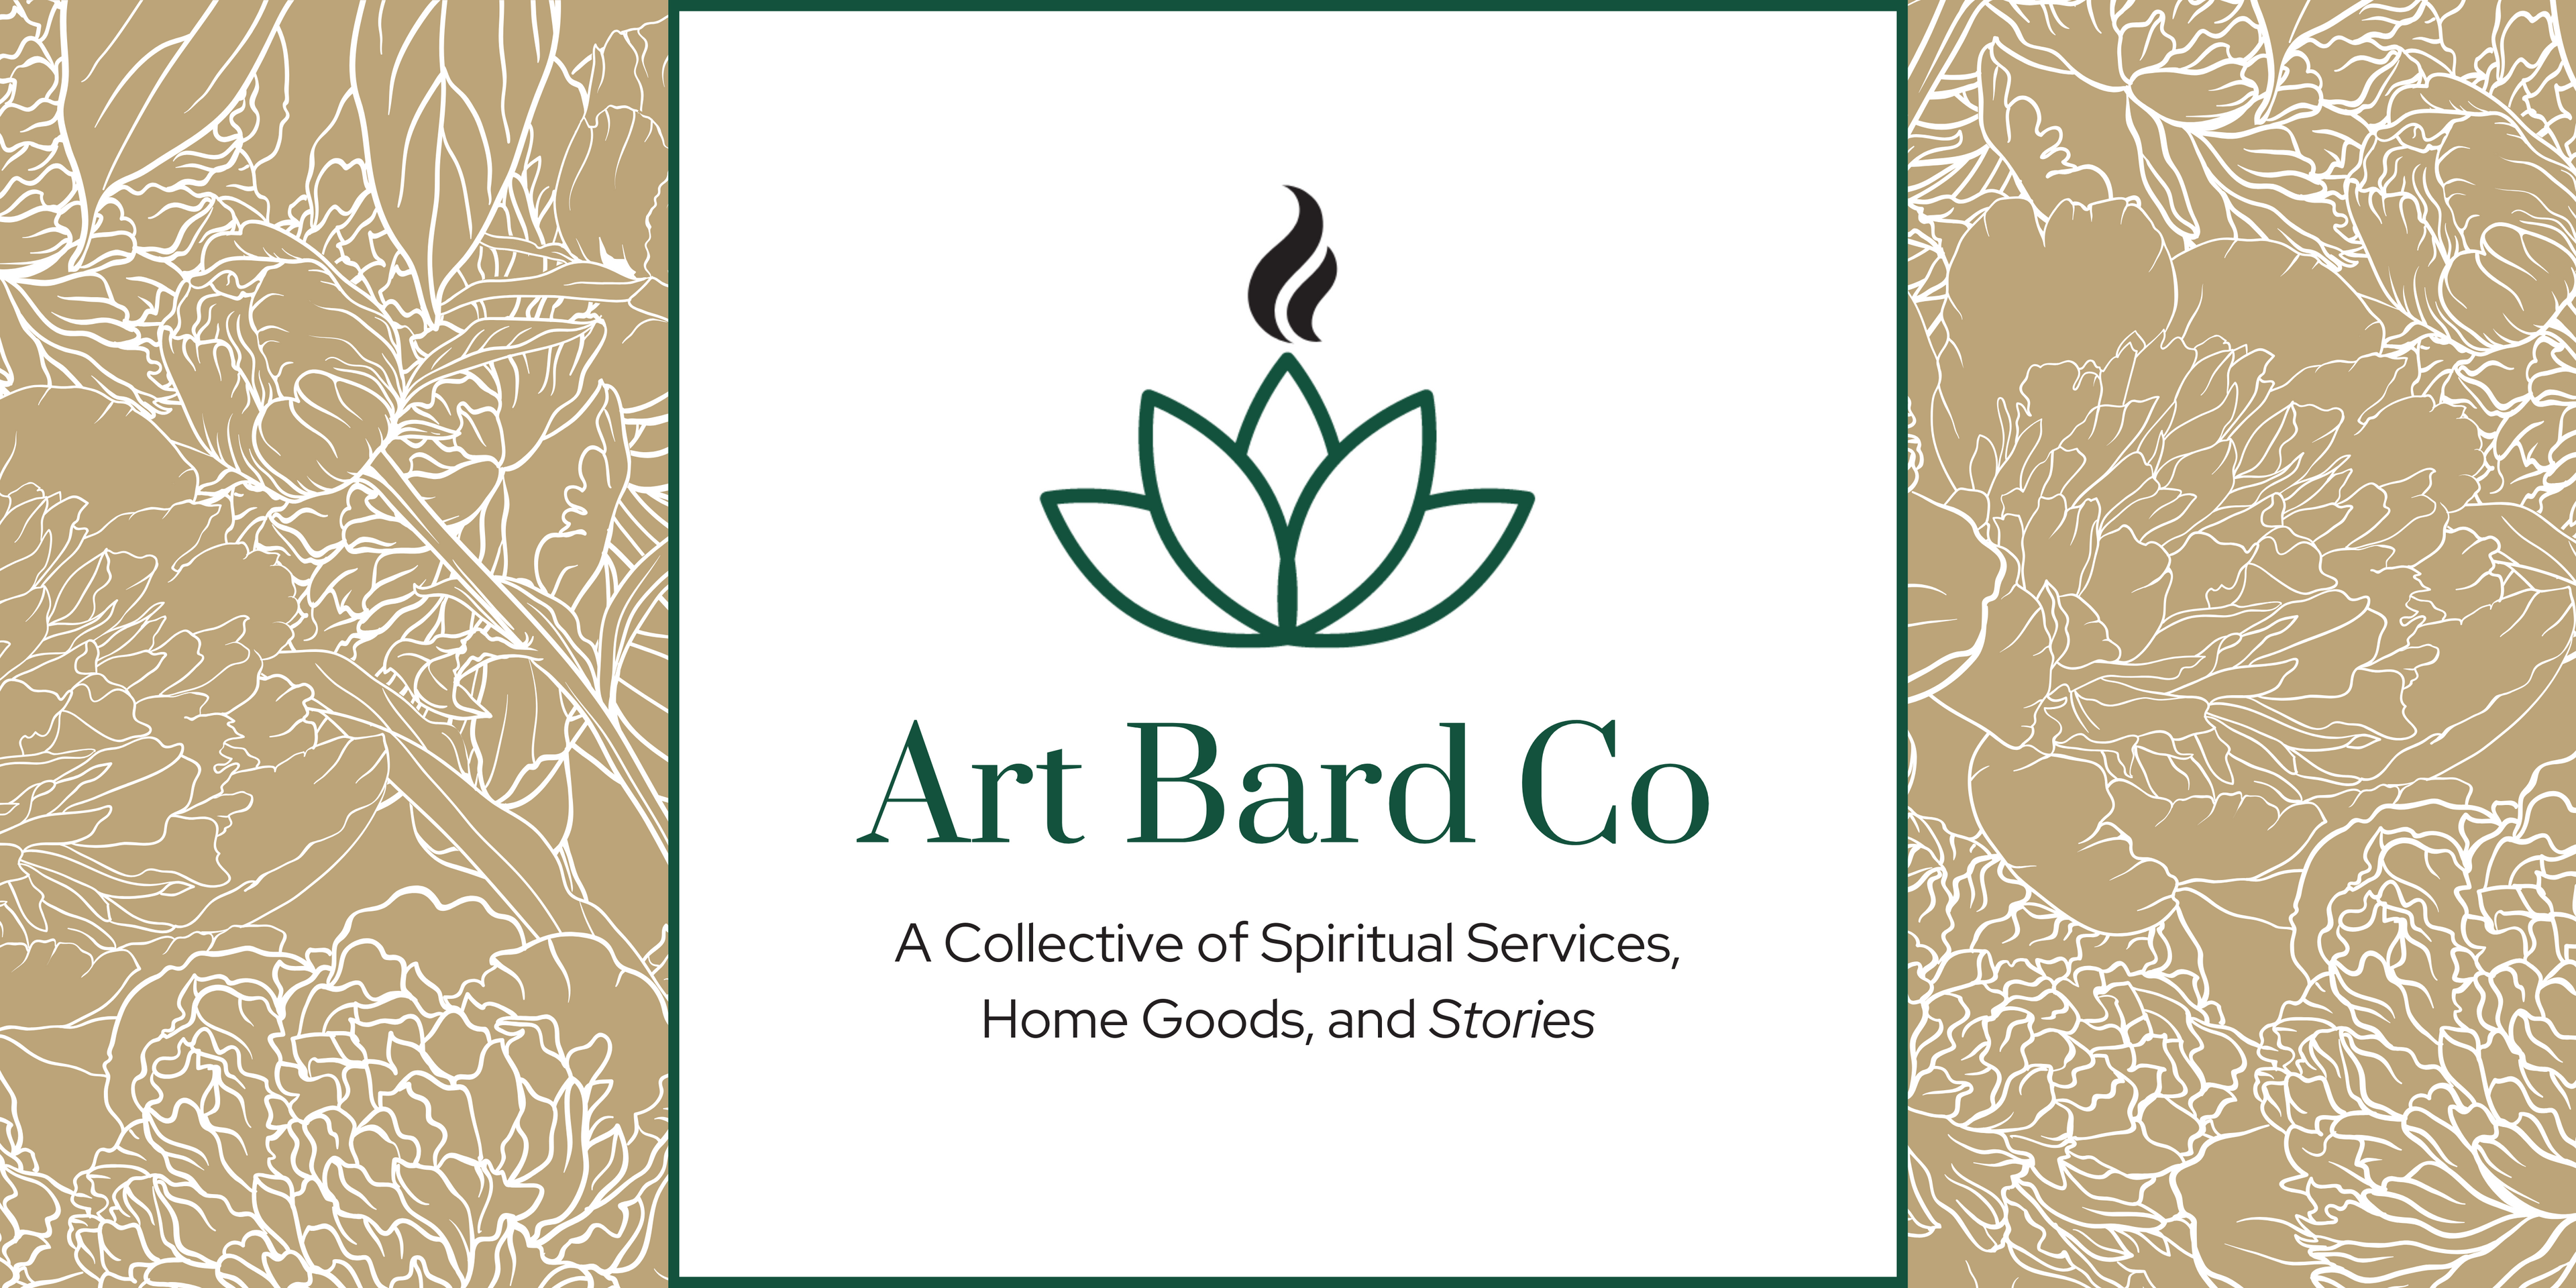 Teal, Tan, and White Site Banner with floral background for Art Bard Co on the website ArtBard.Co